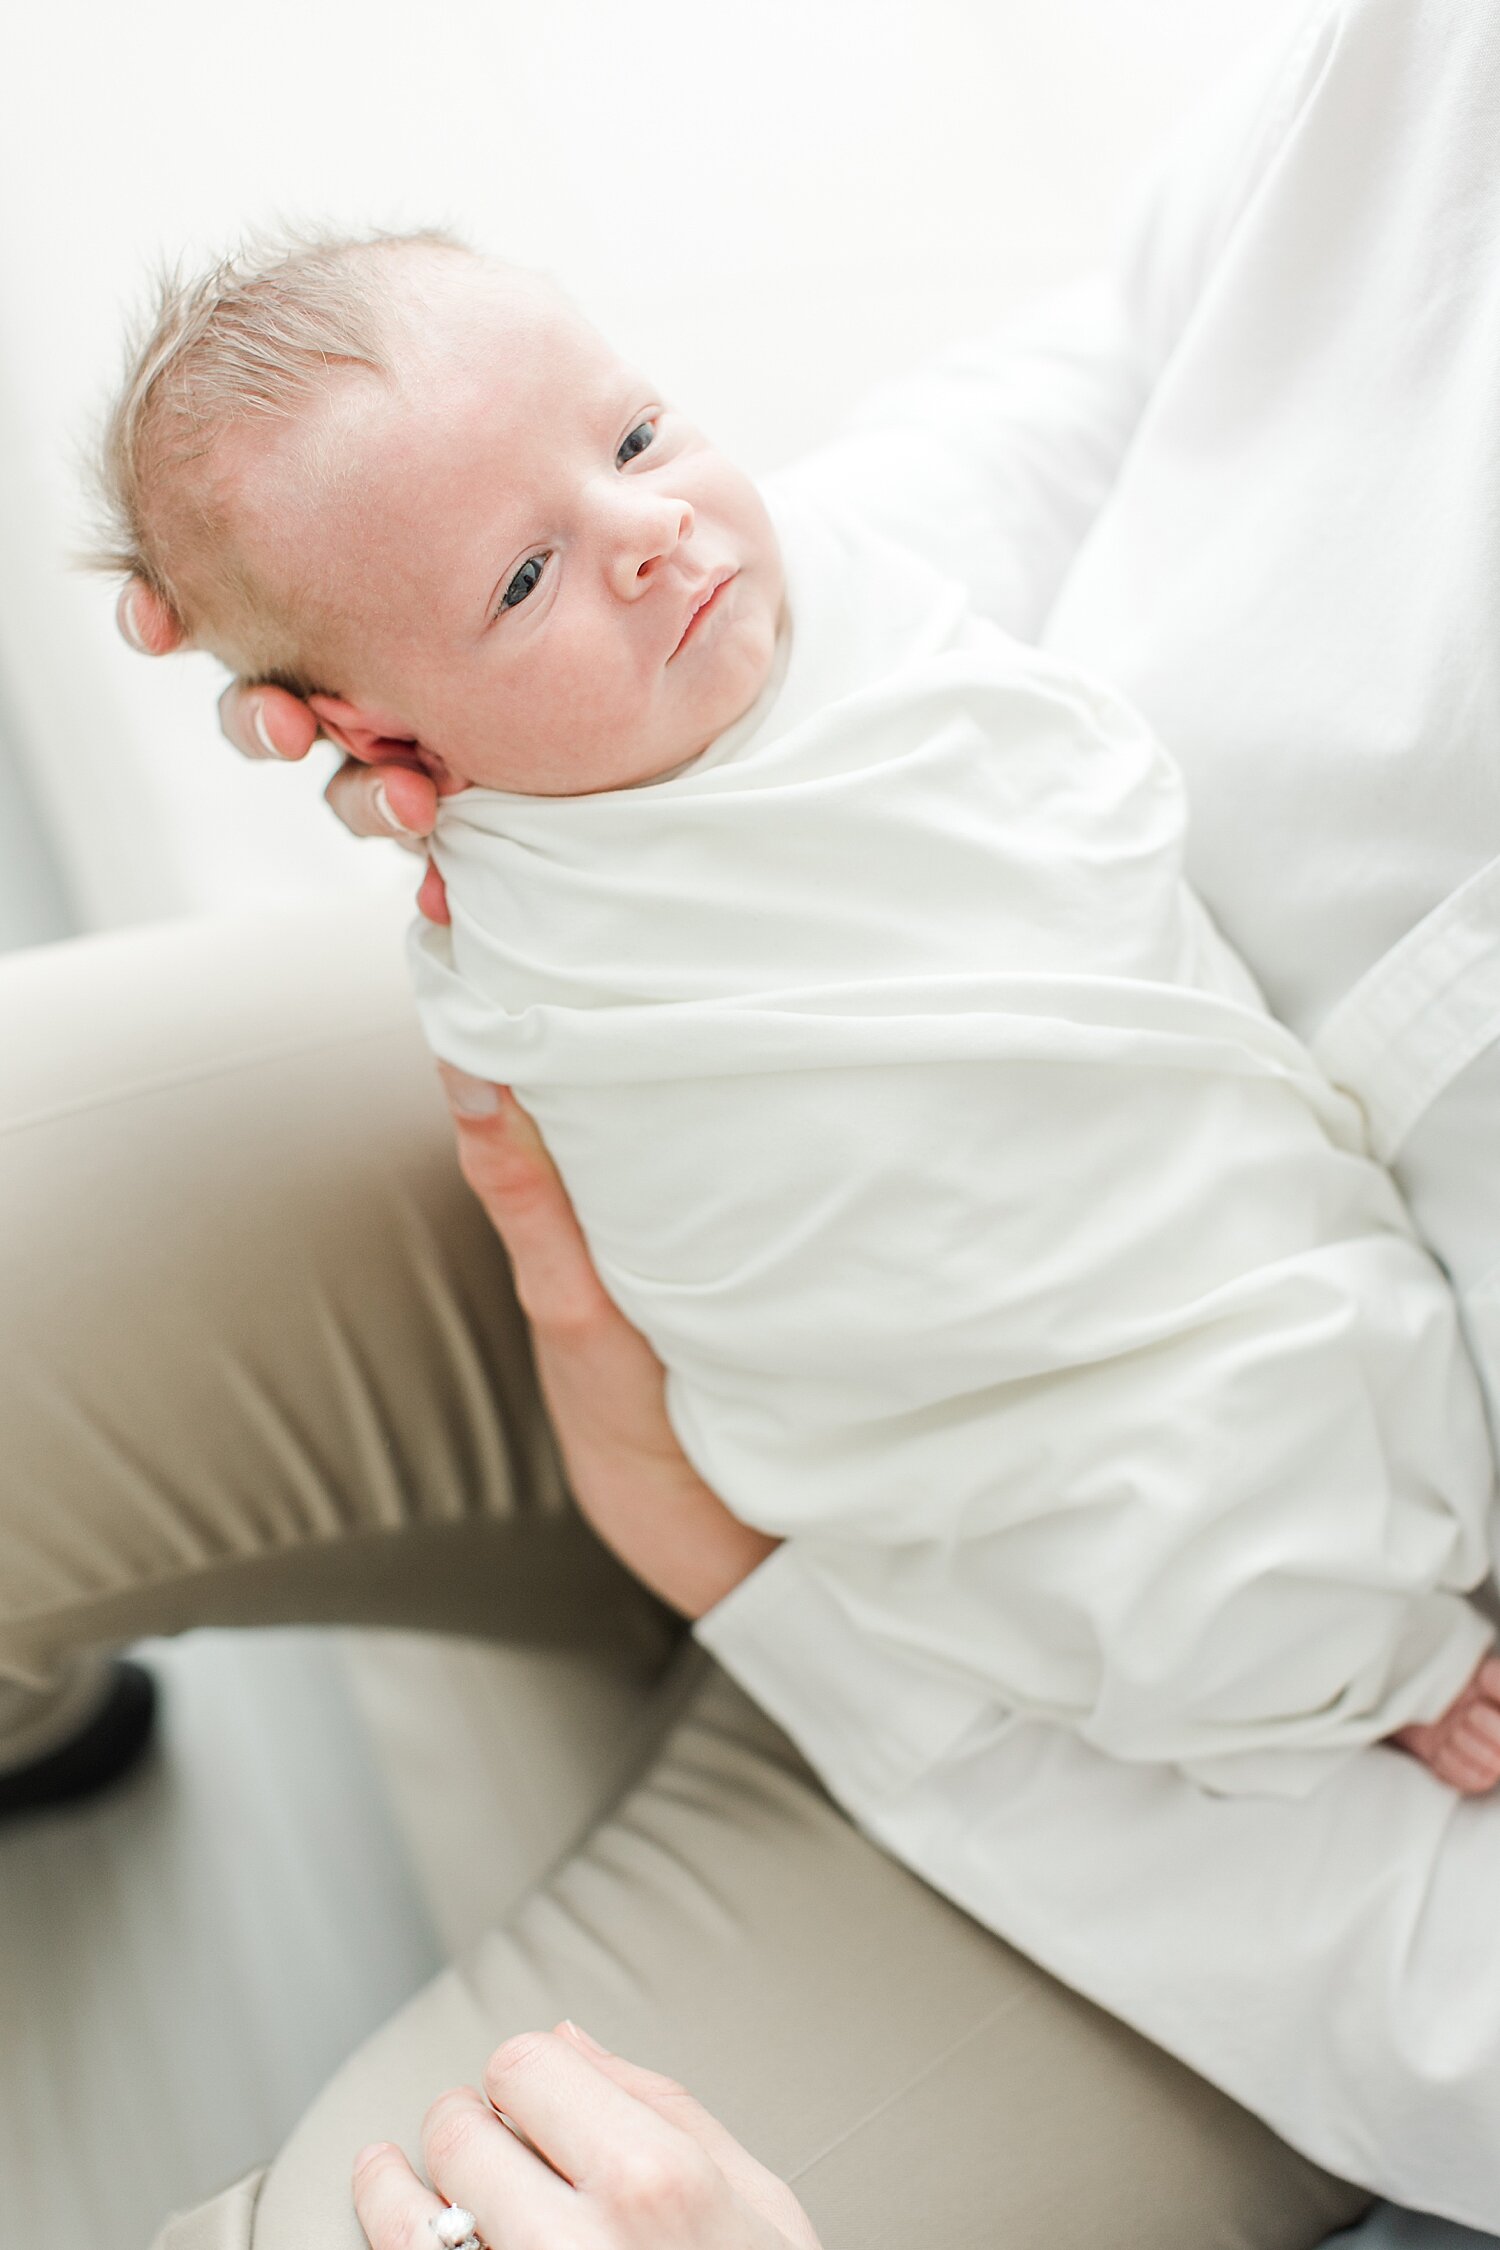 Newborn swaddled in white. Photos by Kristin Wood Photography in Darien, CT.